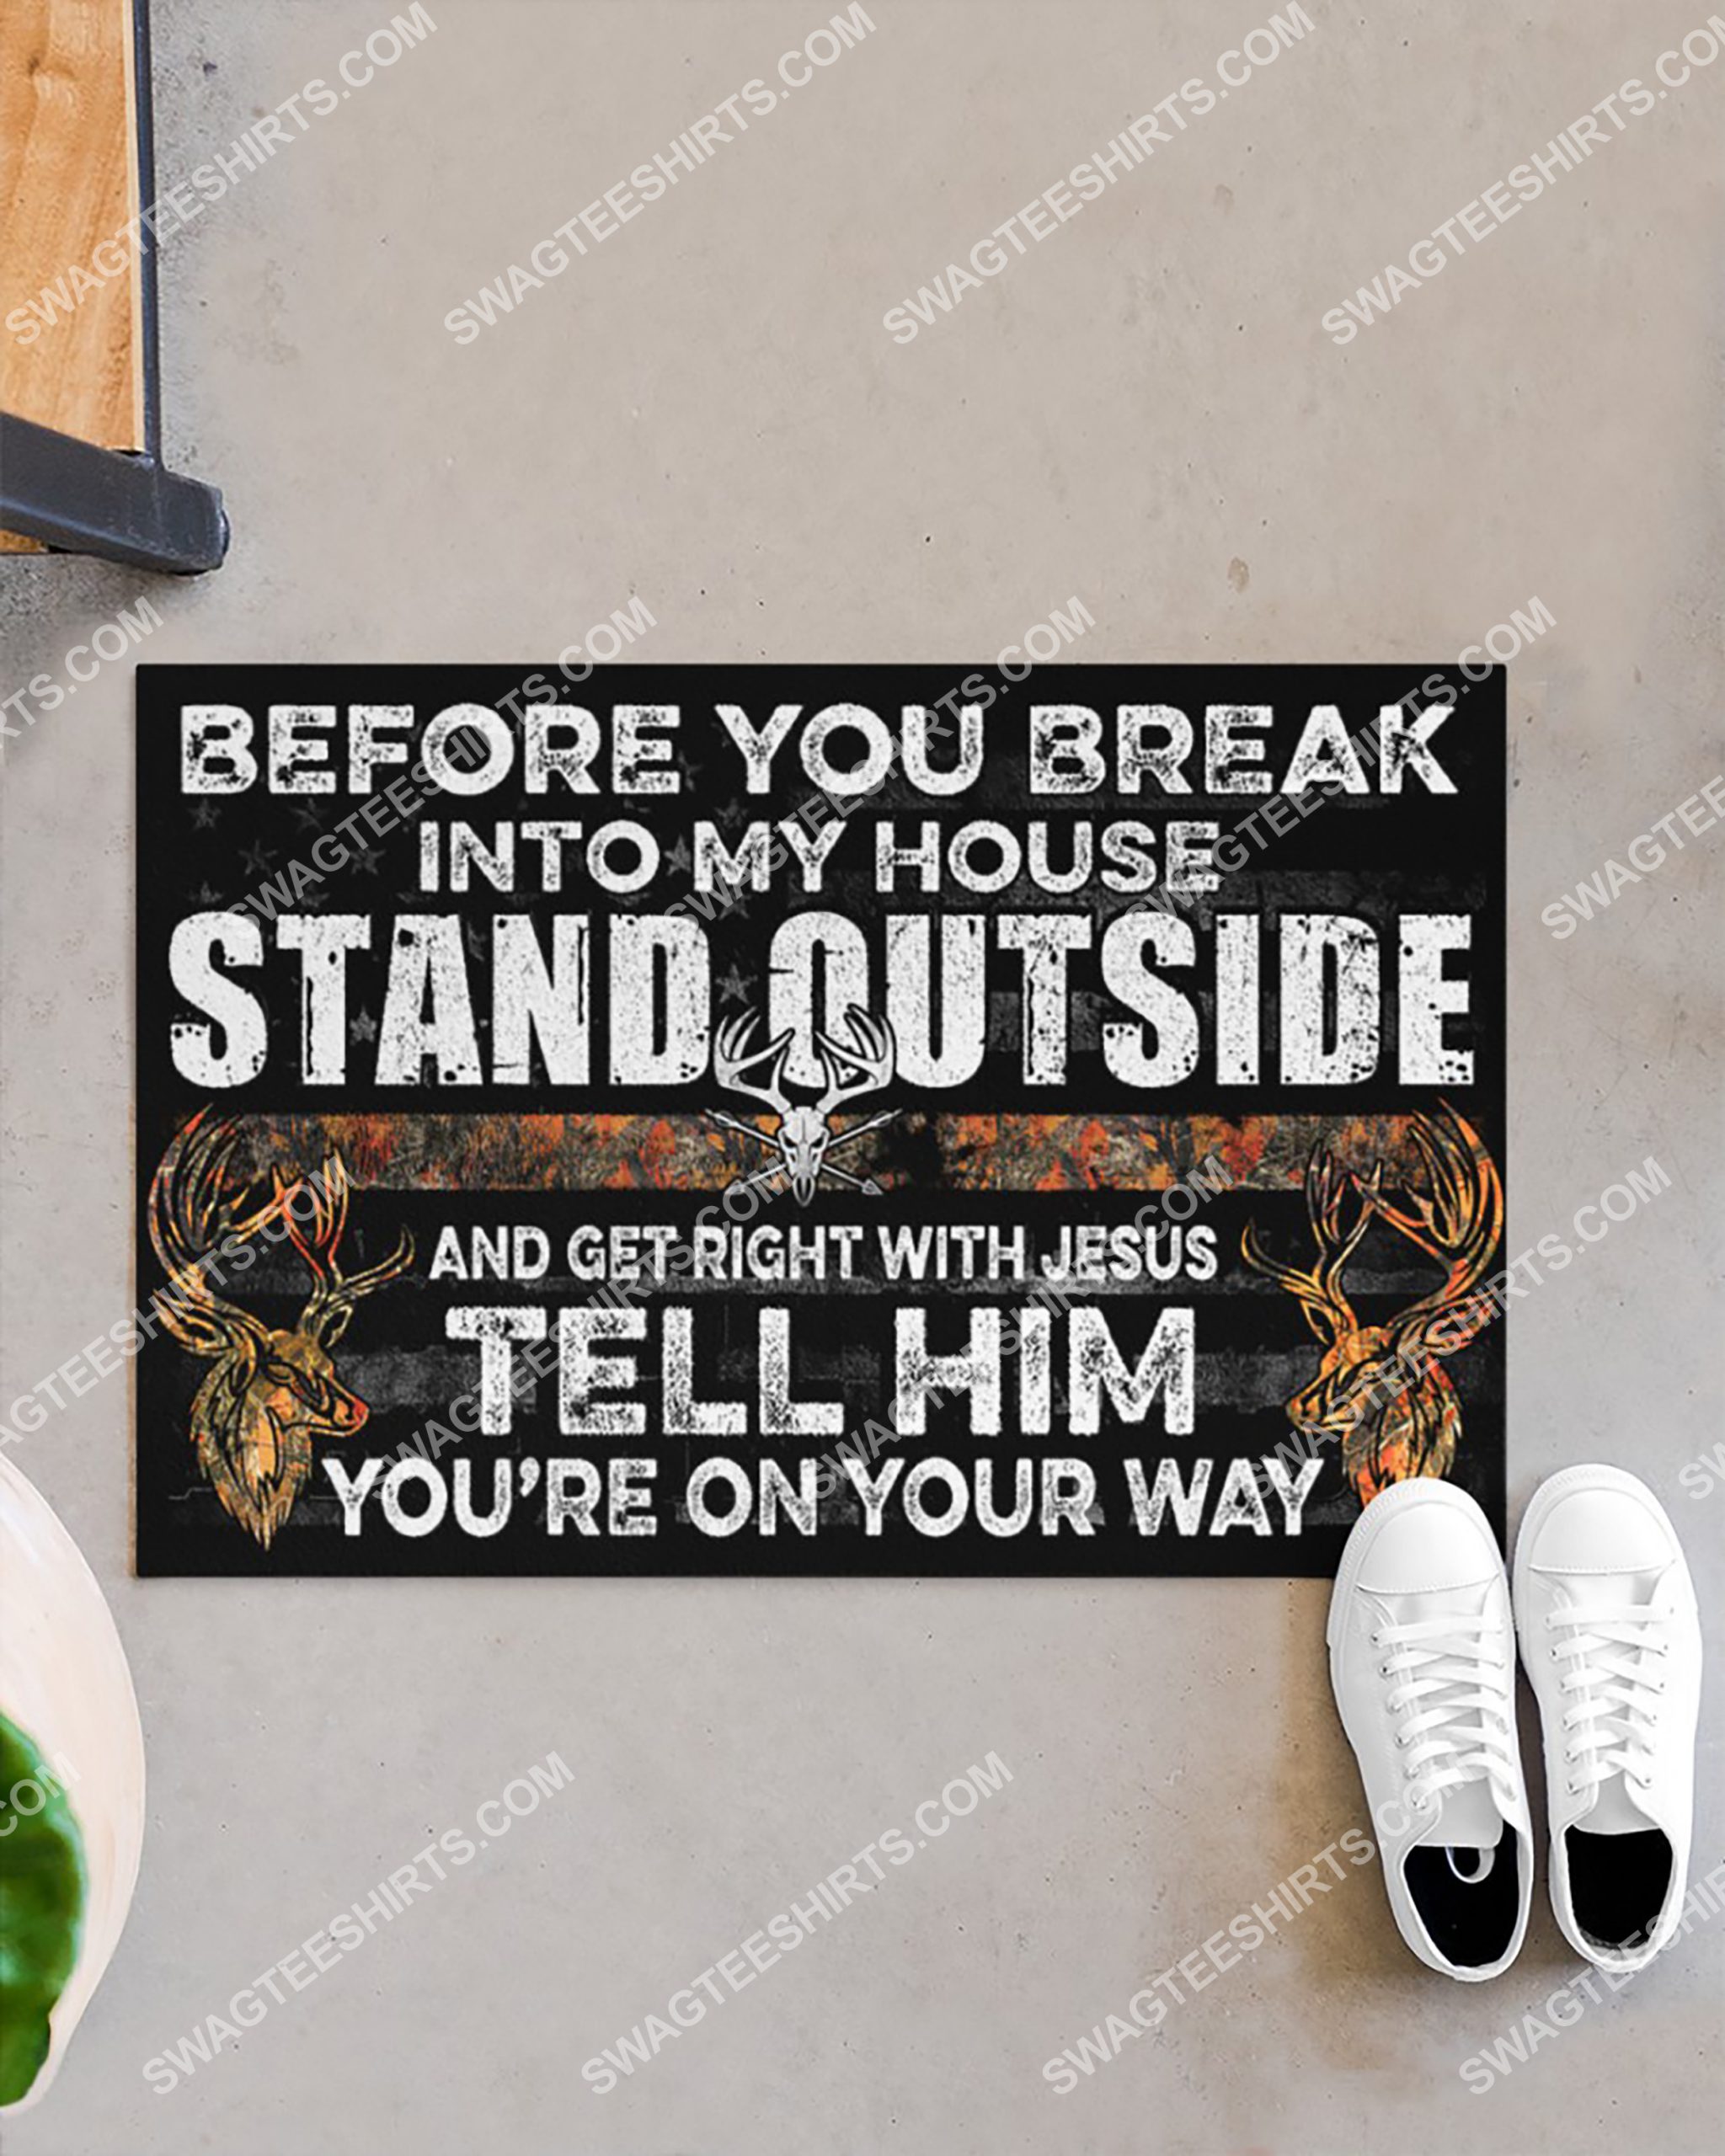 before you break into my house stand outside and get right with Jesus doormat 4(1)